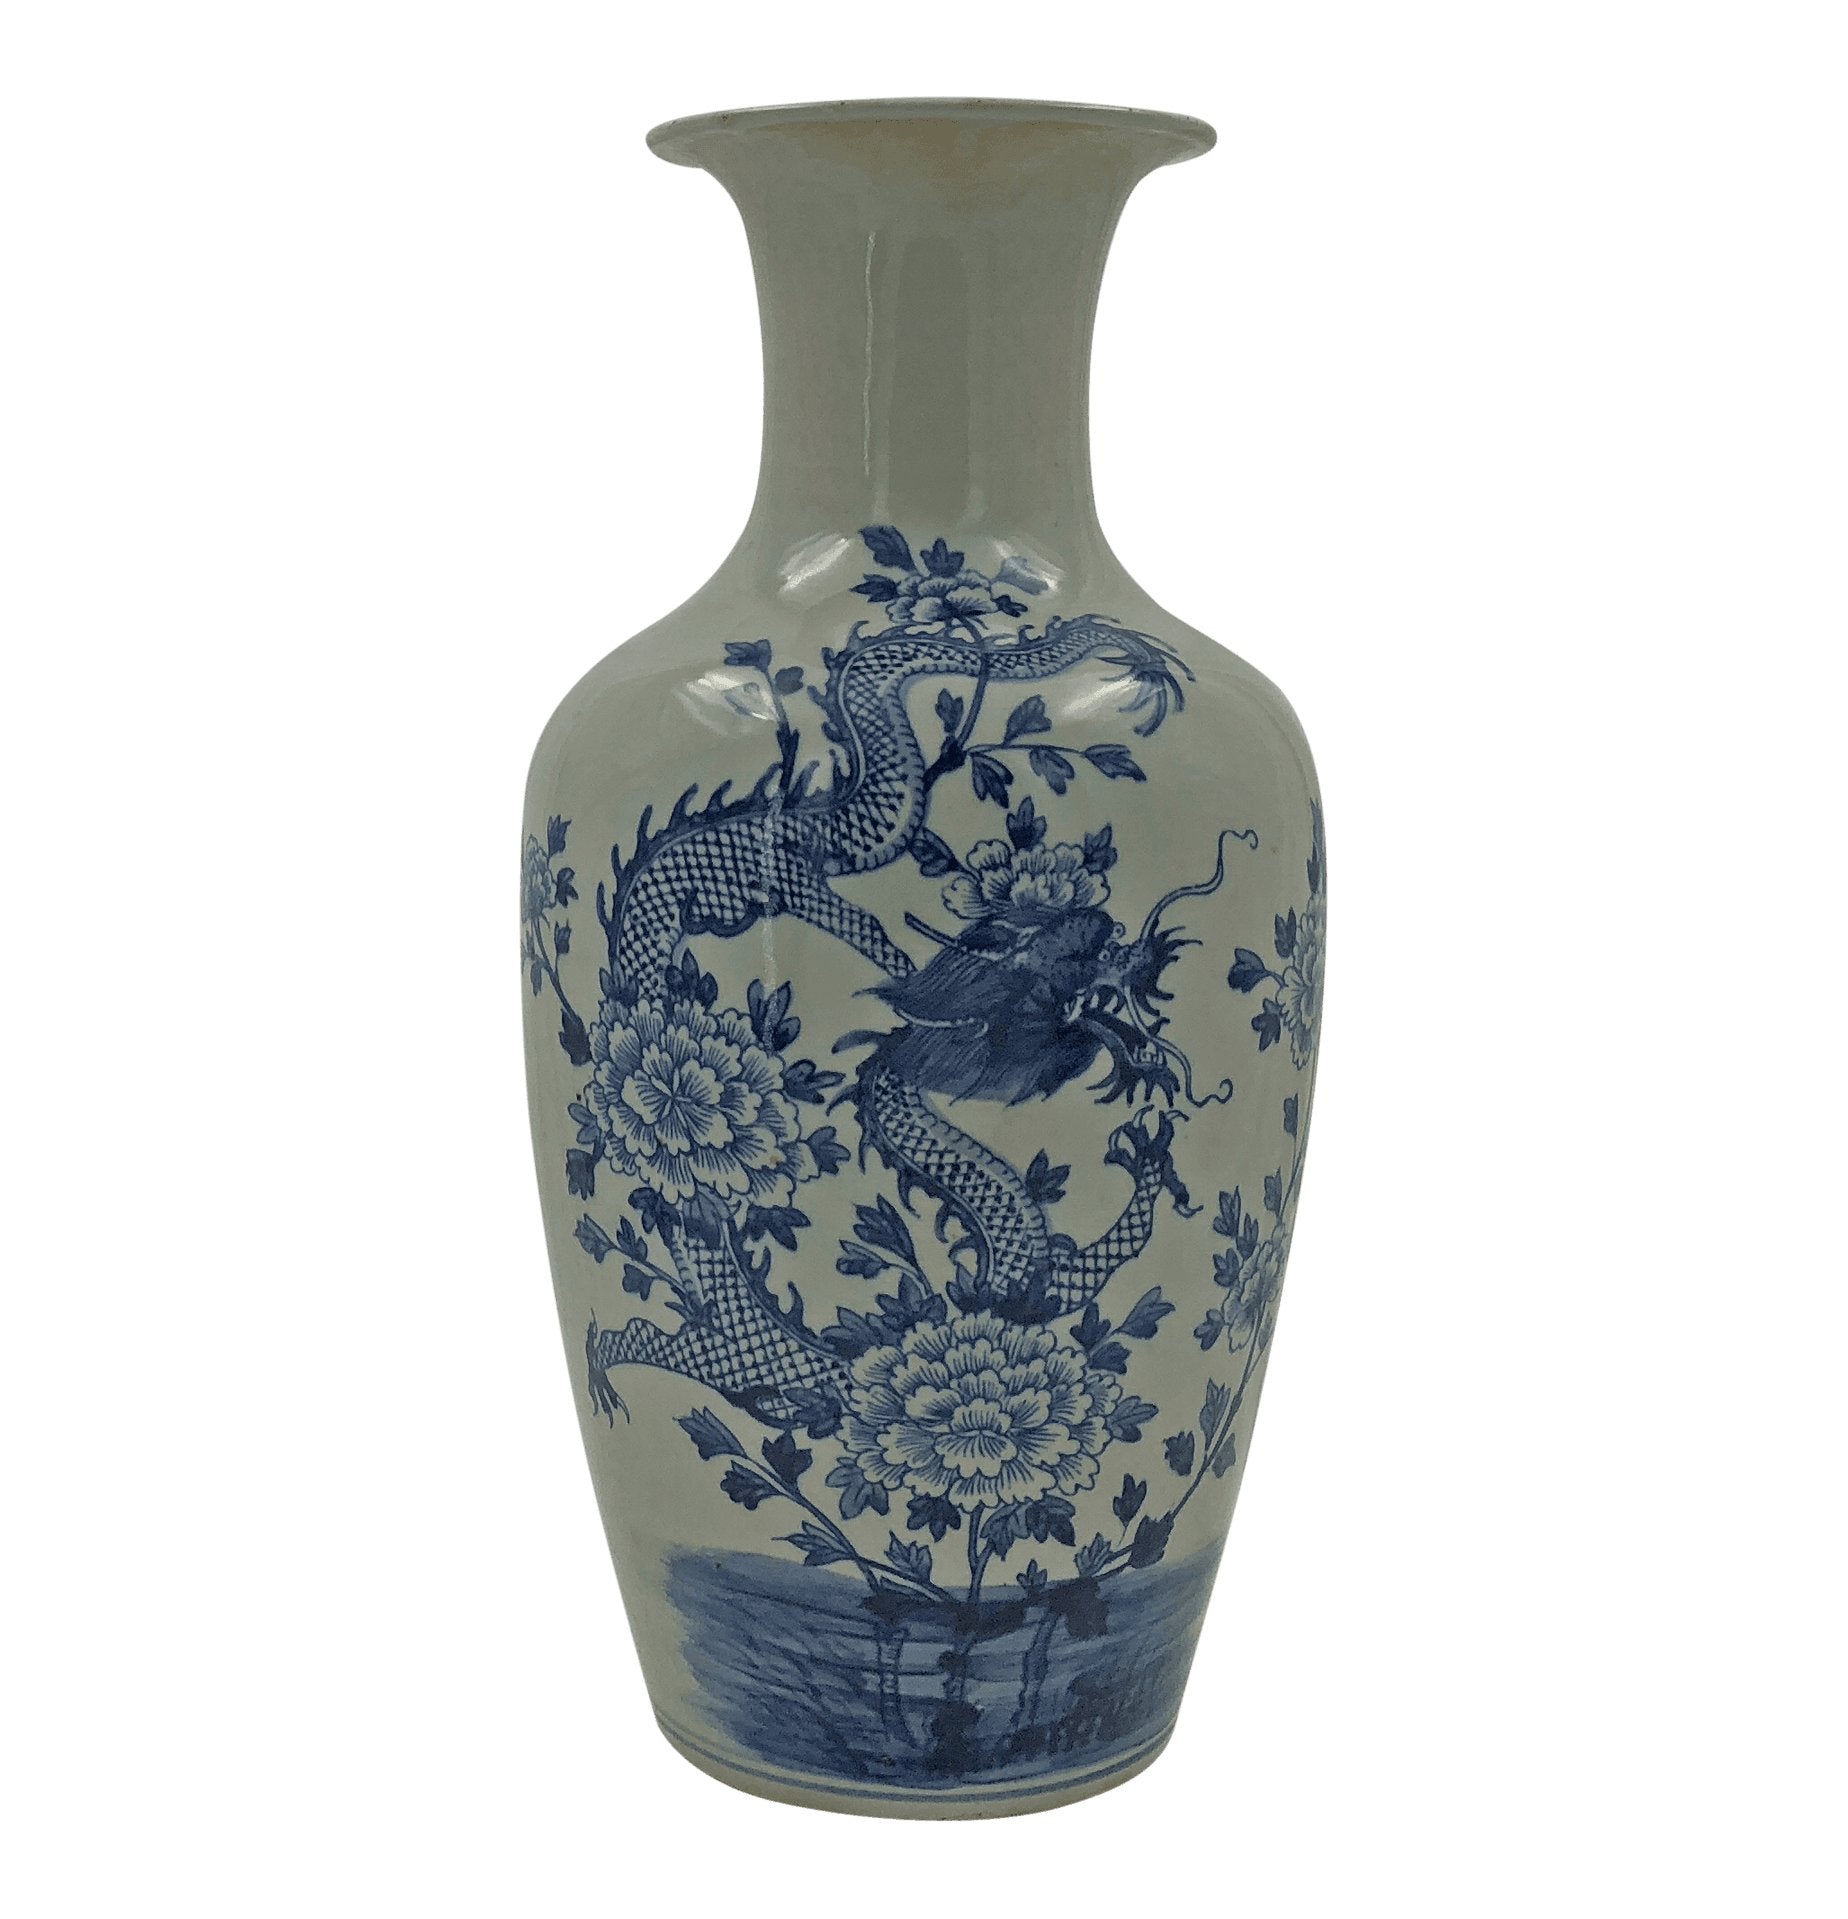 Pair of Chinese Blue and White Flared Dragon Vases - English Georgian America